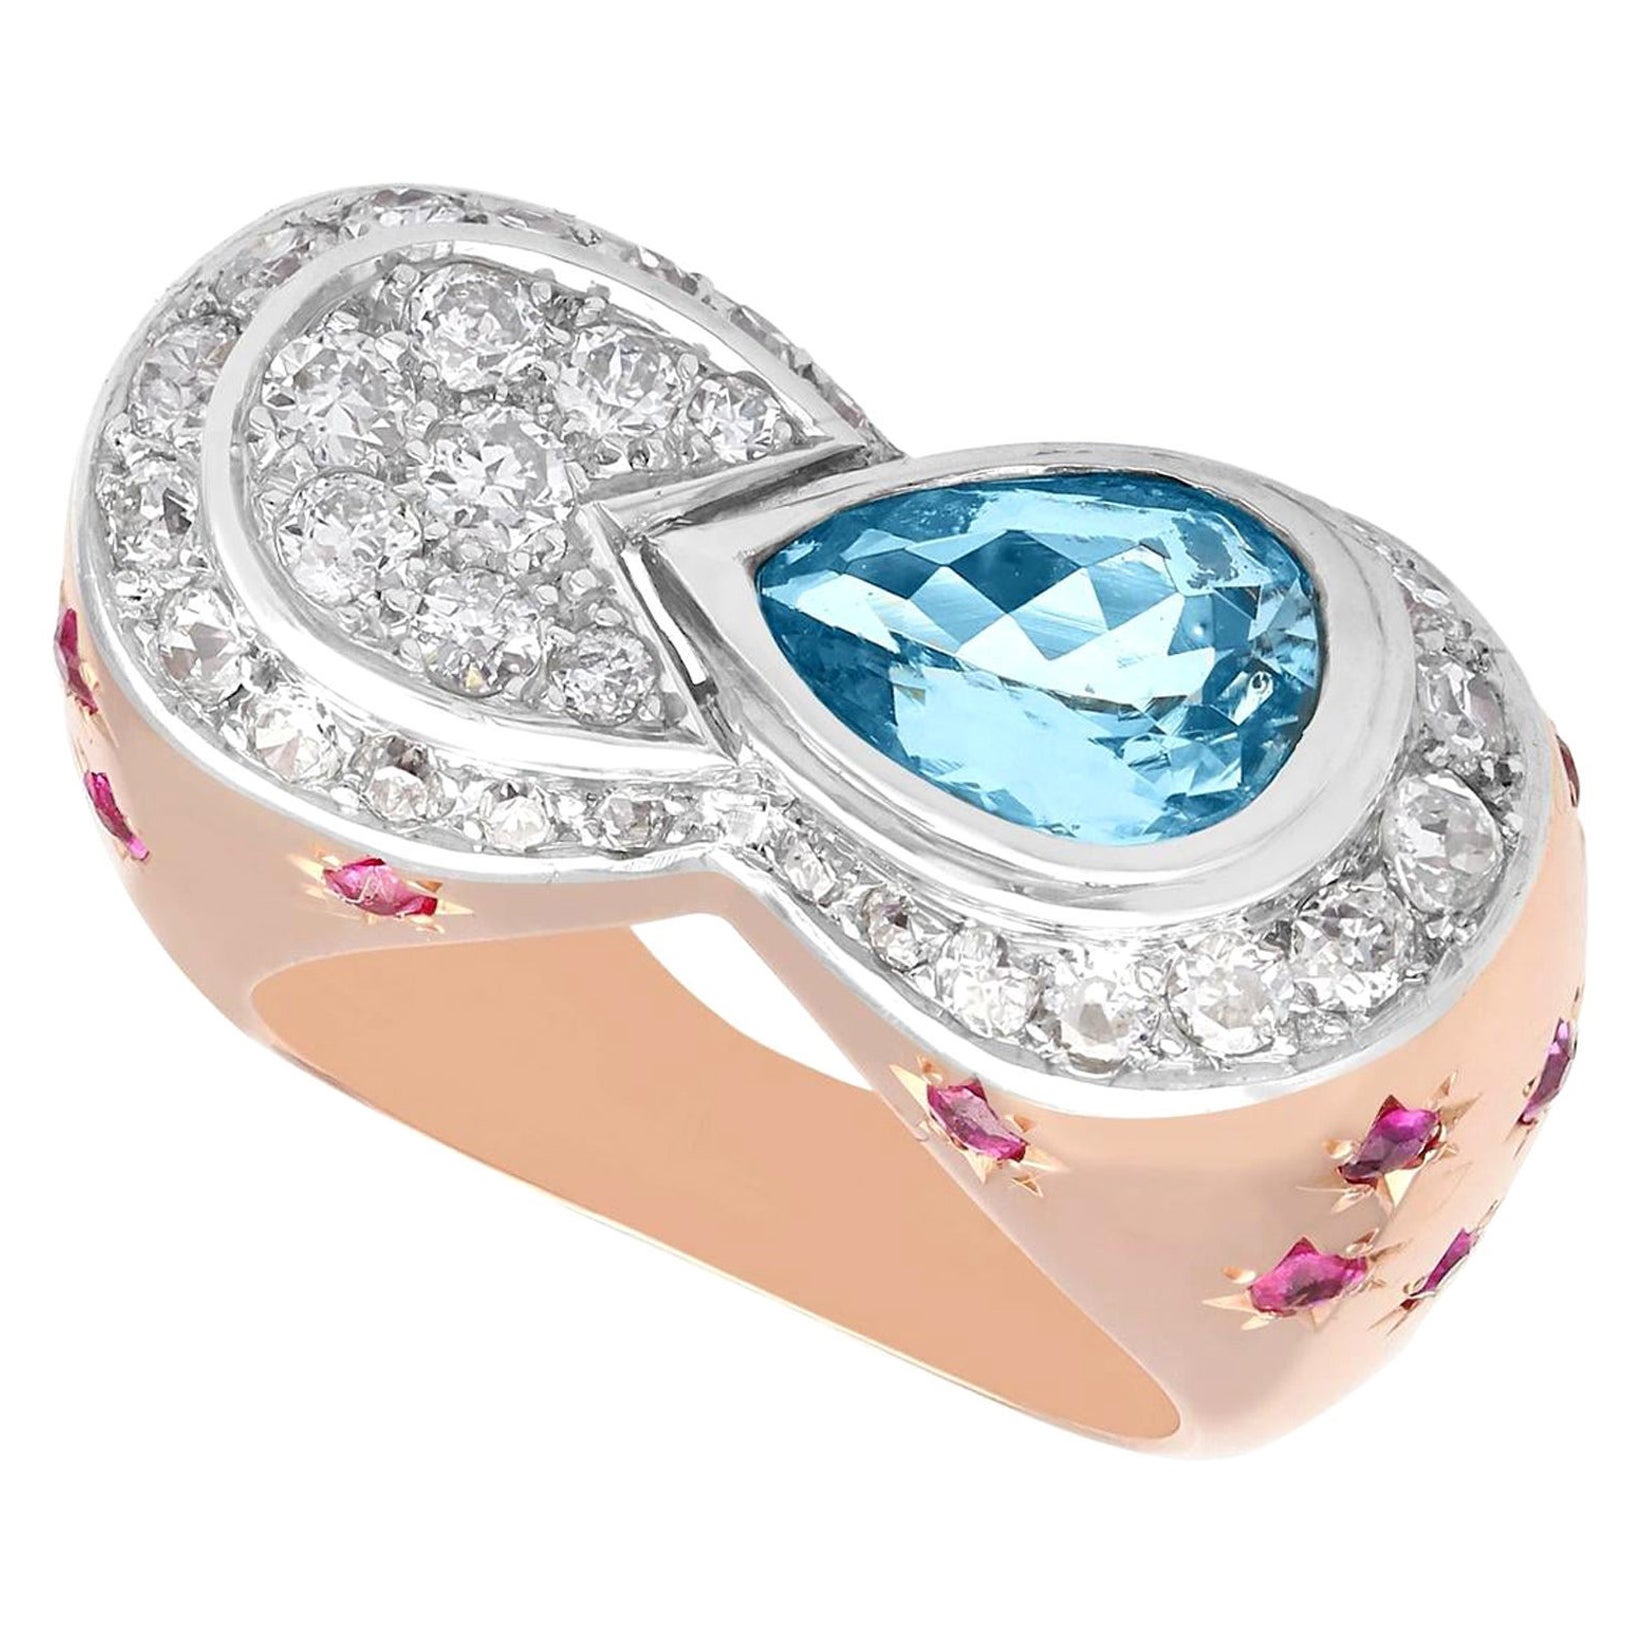 1.36 Carat Pear Aquamarine Diamond and Ruby Rose Gold Cocktail Ring